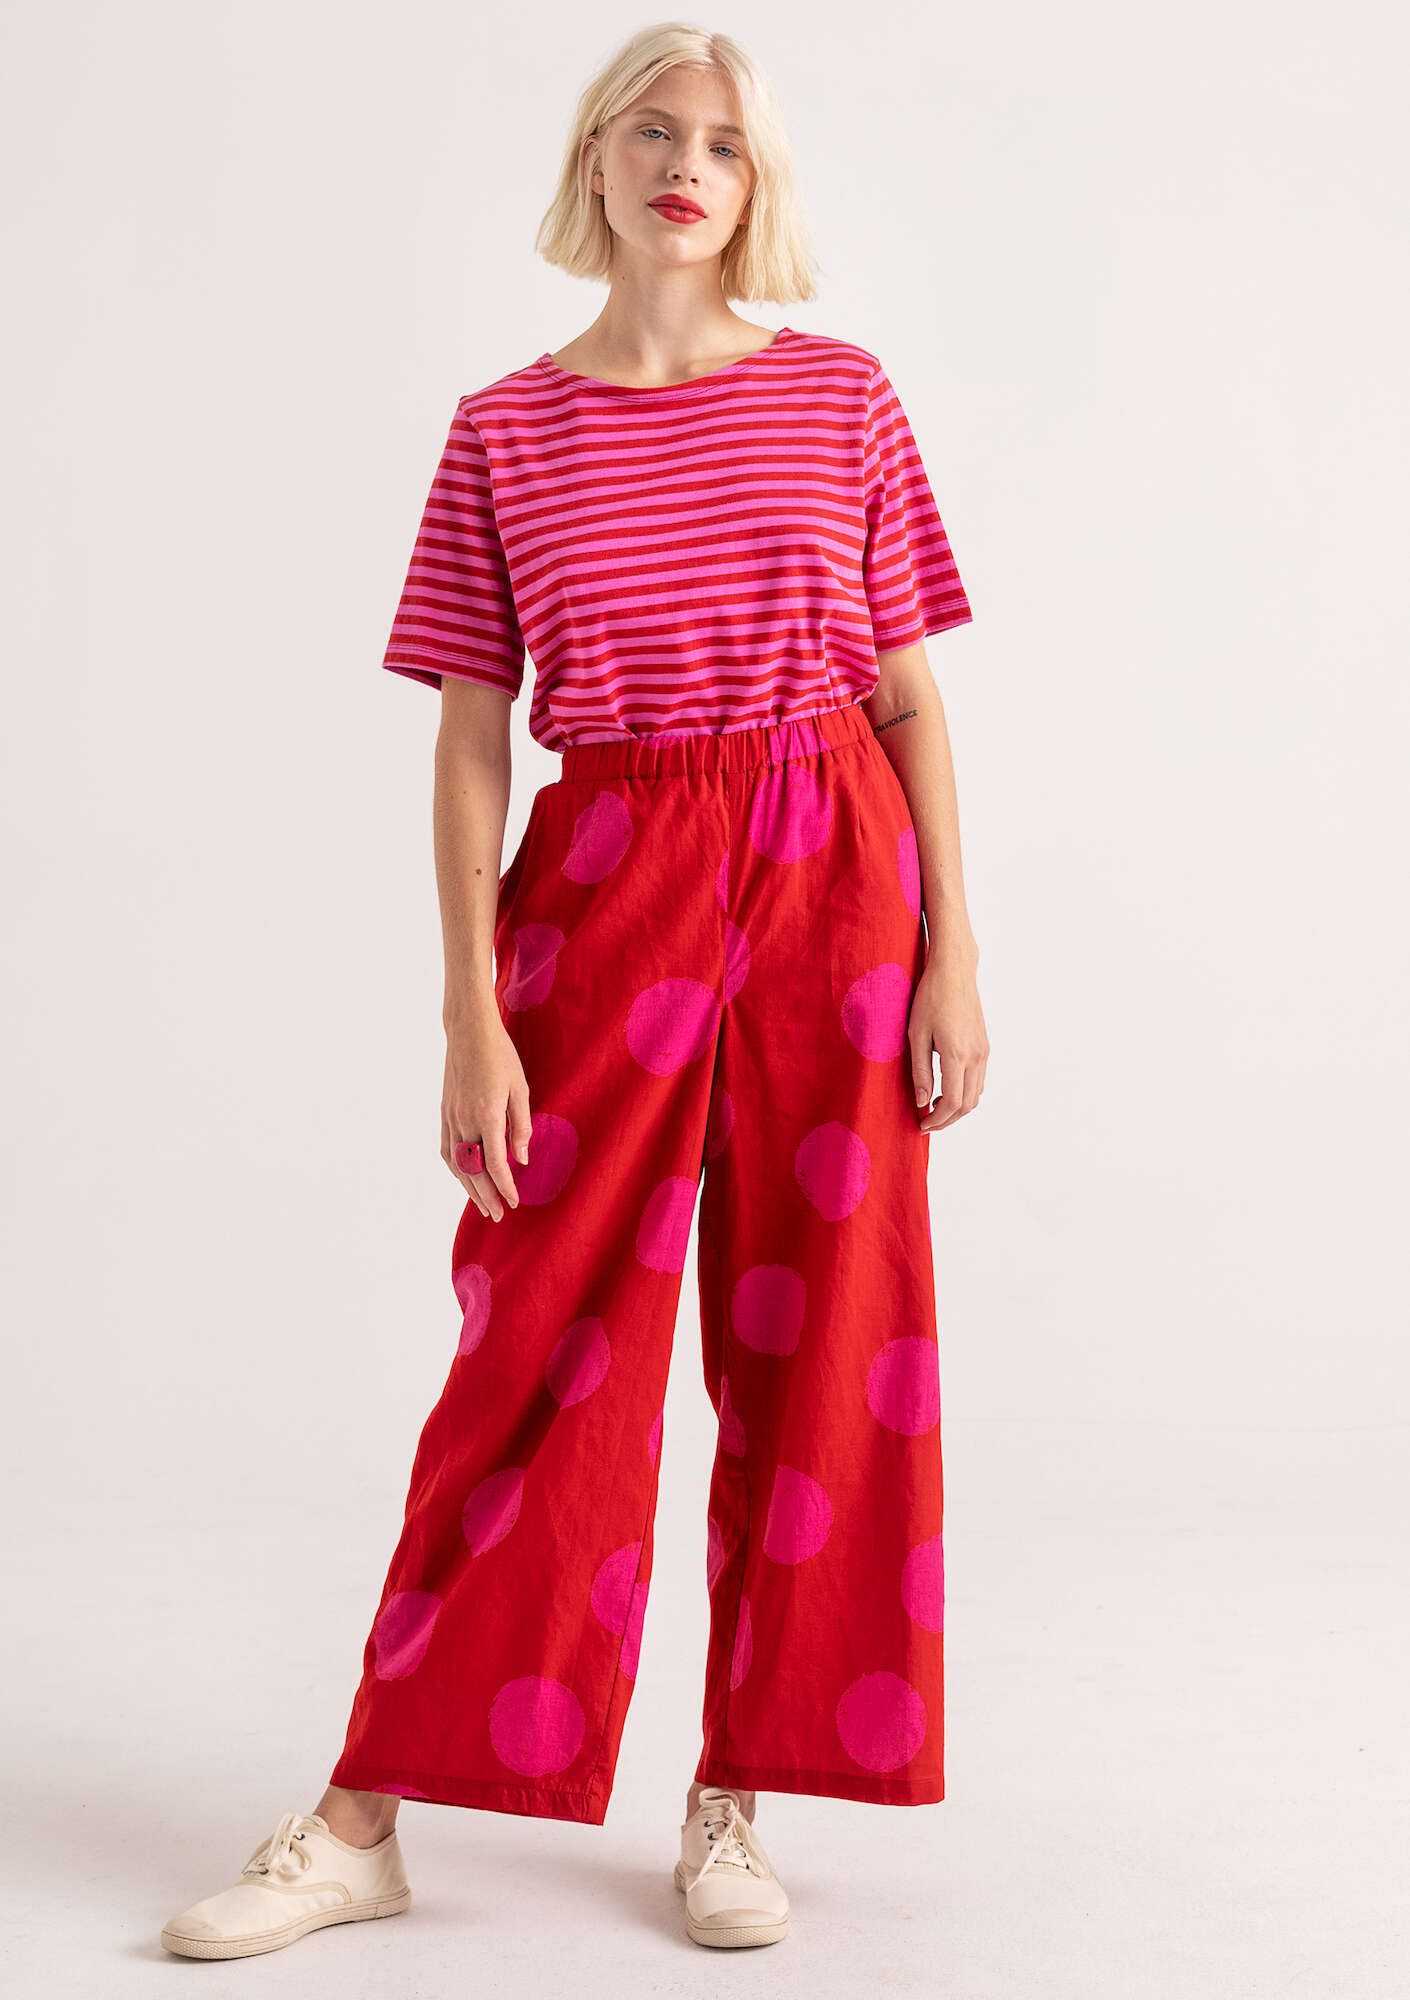  Woven “Palette” pants in organic cotton parrot red/patterned thumbnail